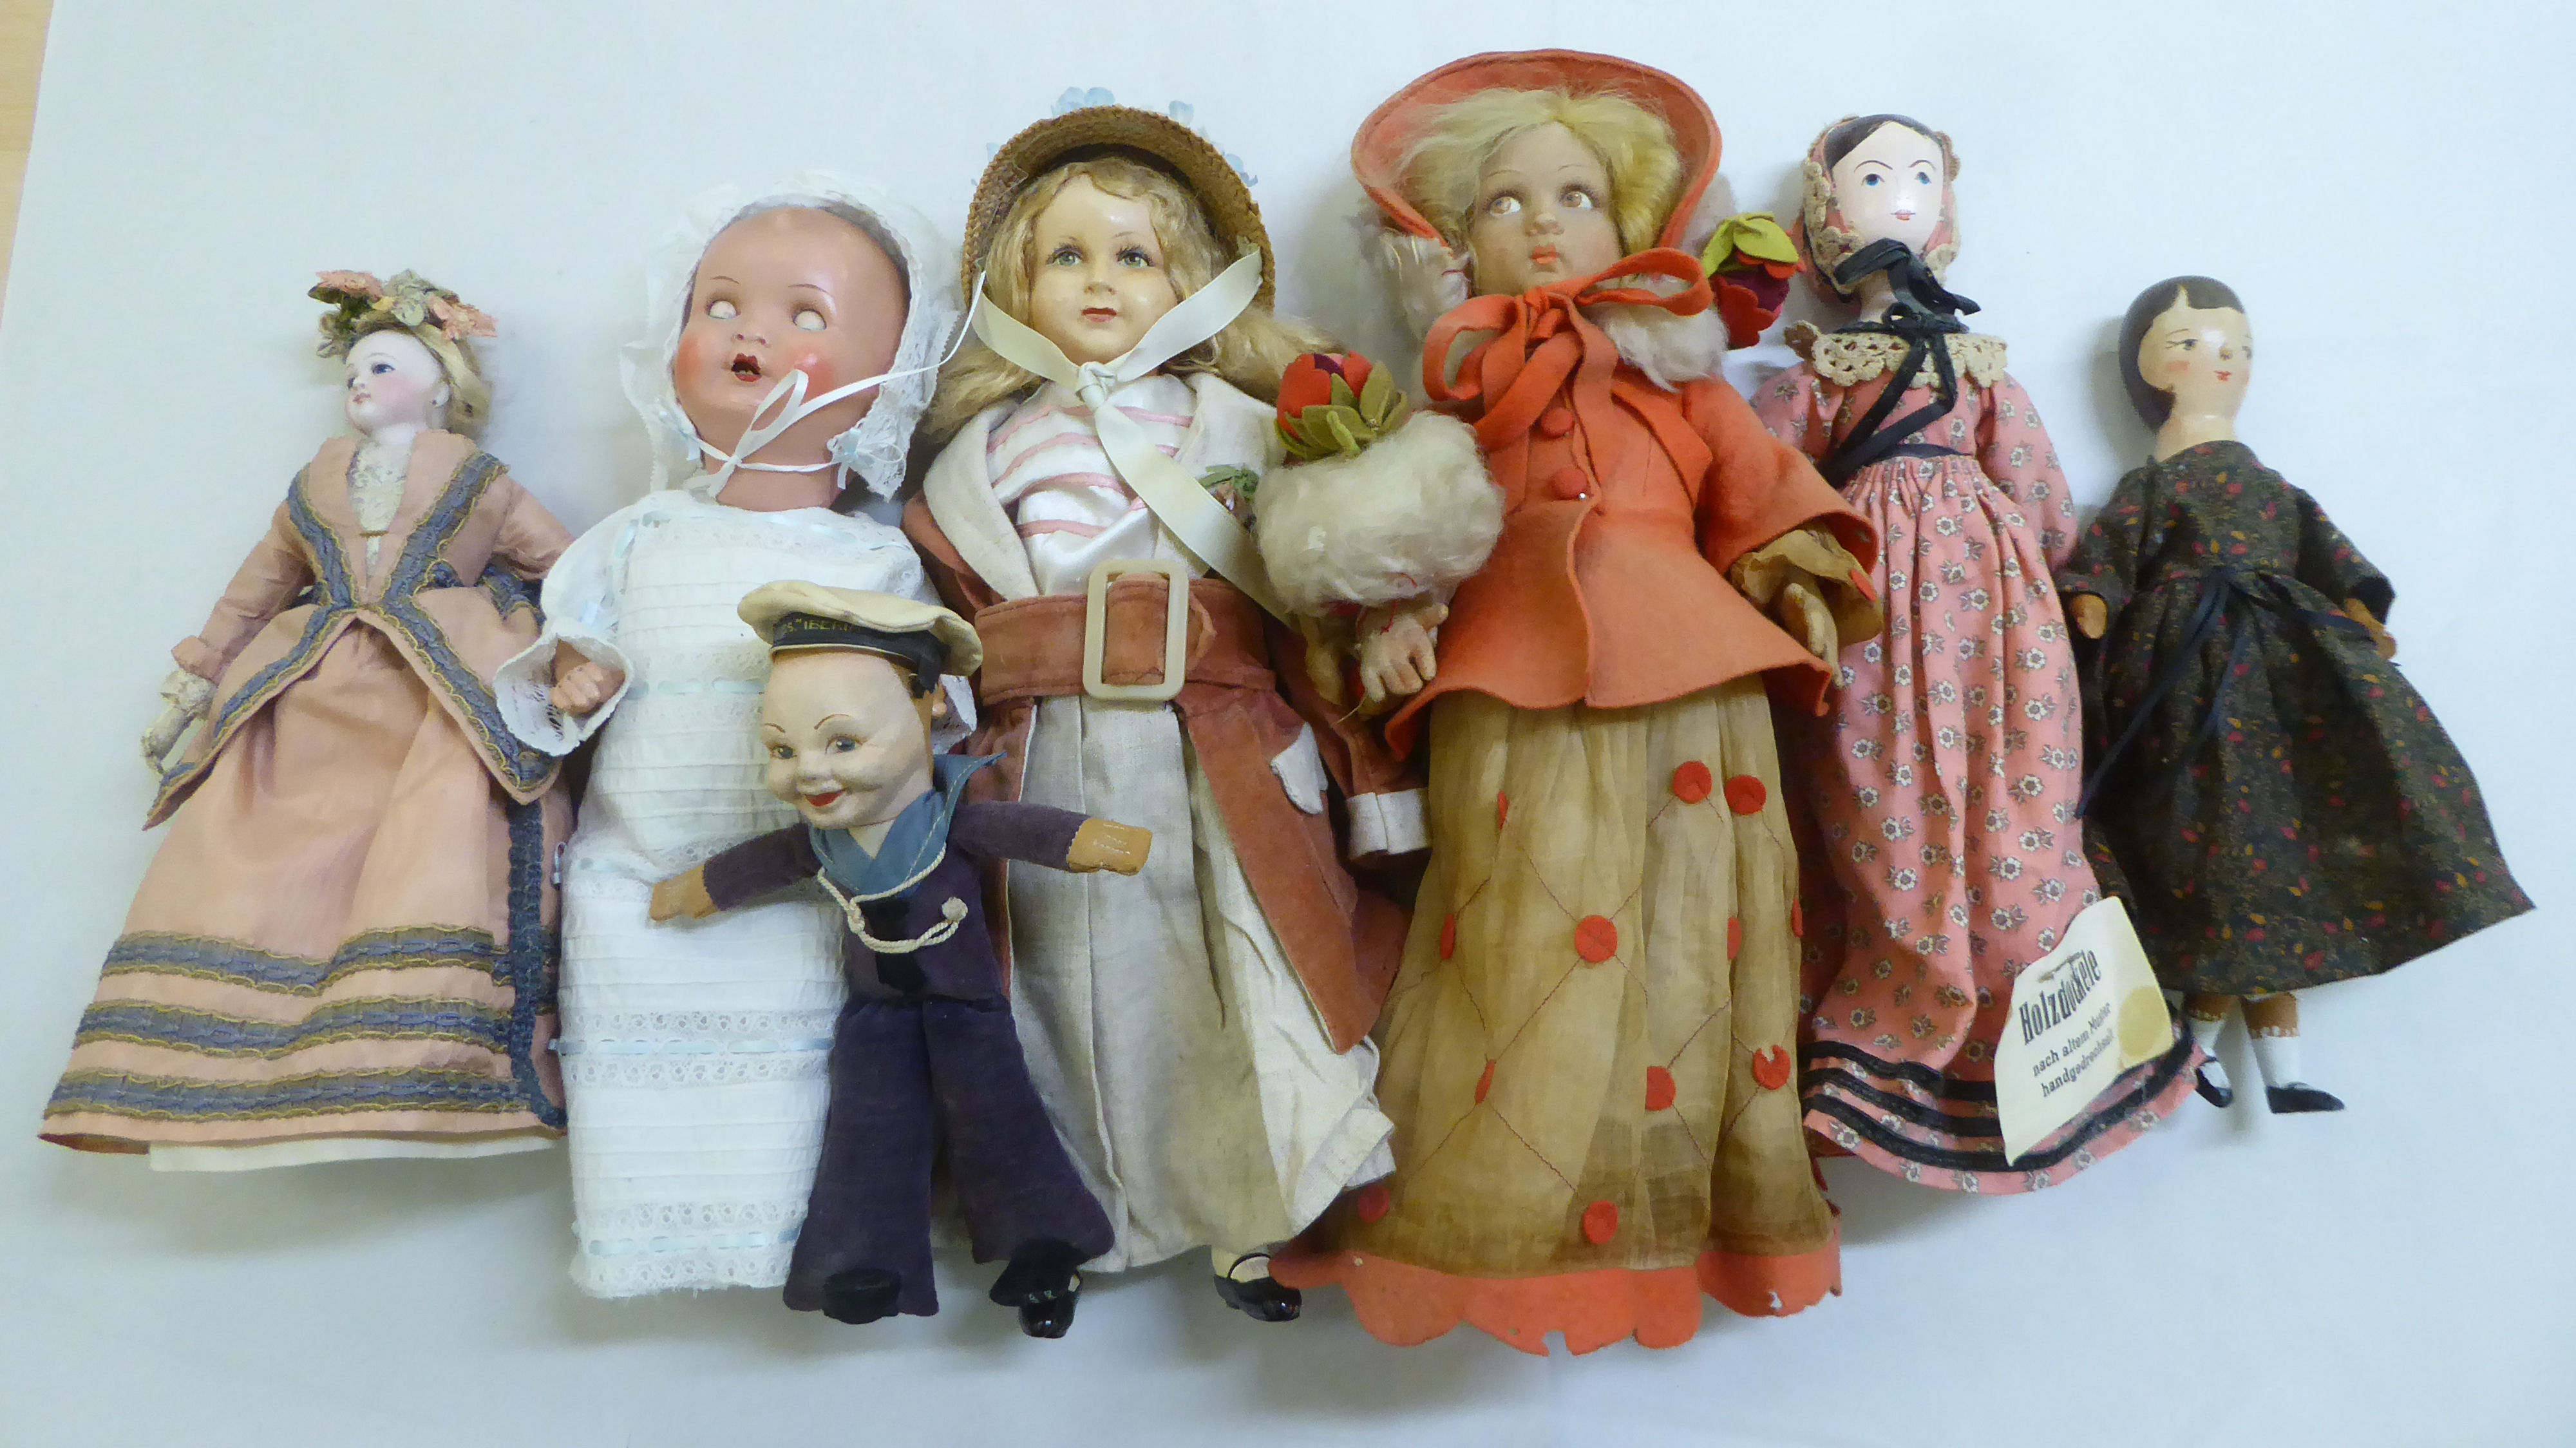 Miscellaneous dolls: to include one dressed in a bonnet and skirt  12"h